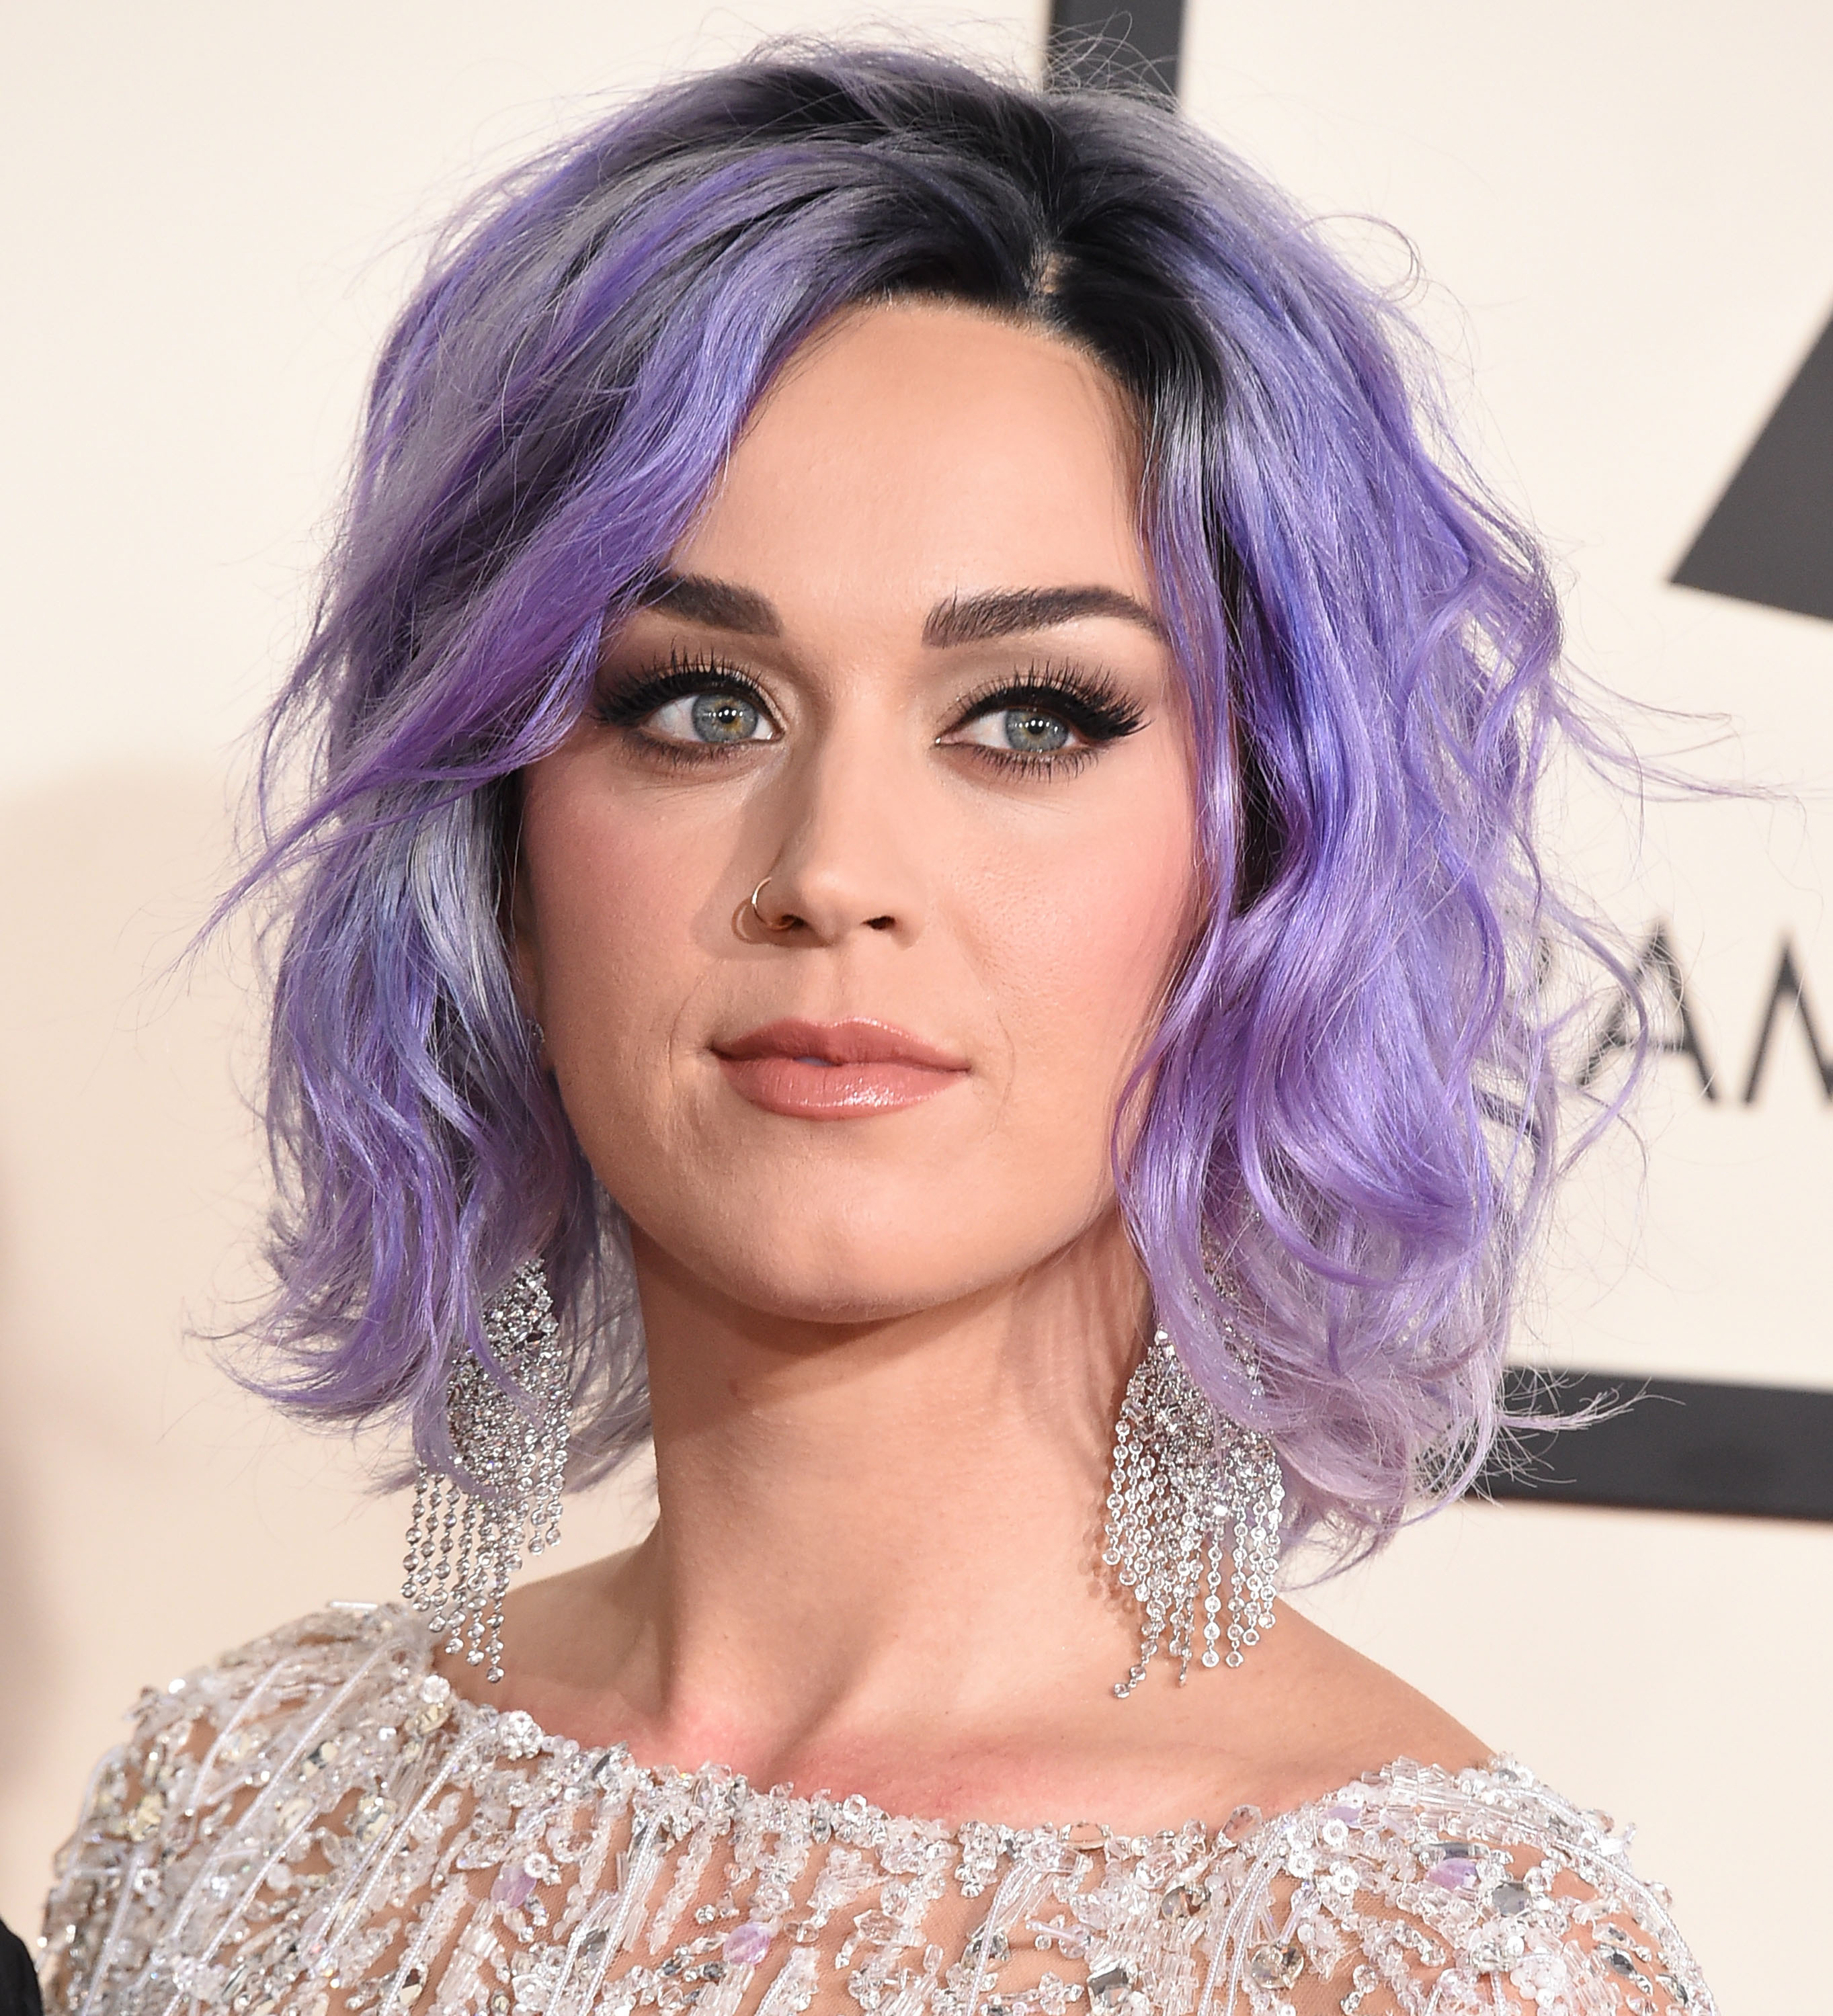 LOS ANGELES, CA - FEBRUARY 08: Katy Perry arrives at the The 57th Annual GRAMMY Awards on February 8, 2015 in Los Angeles, California. (Photo by Steve Granitz/WireImage)